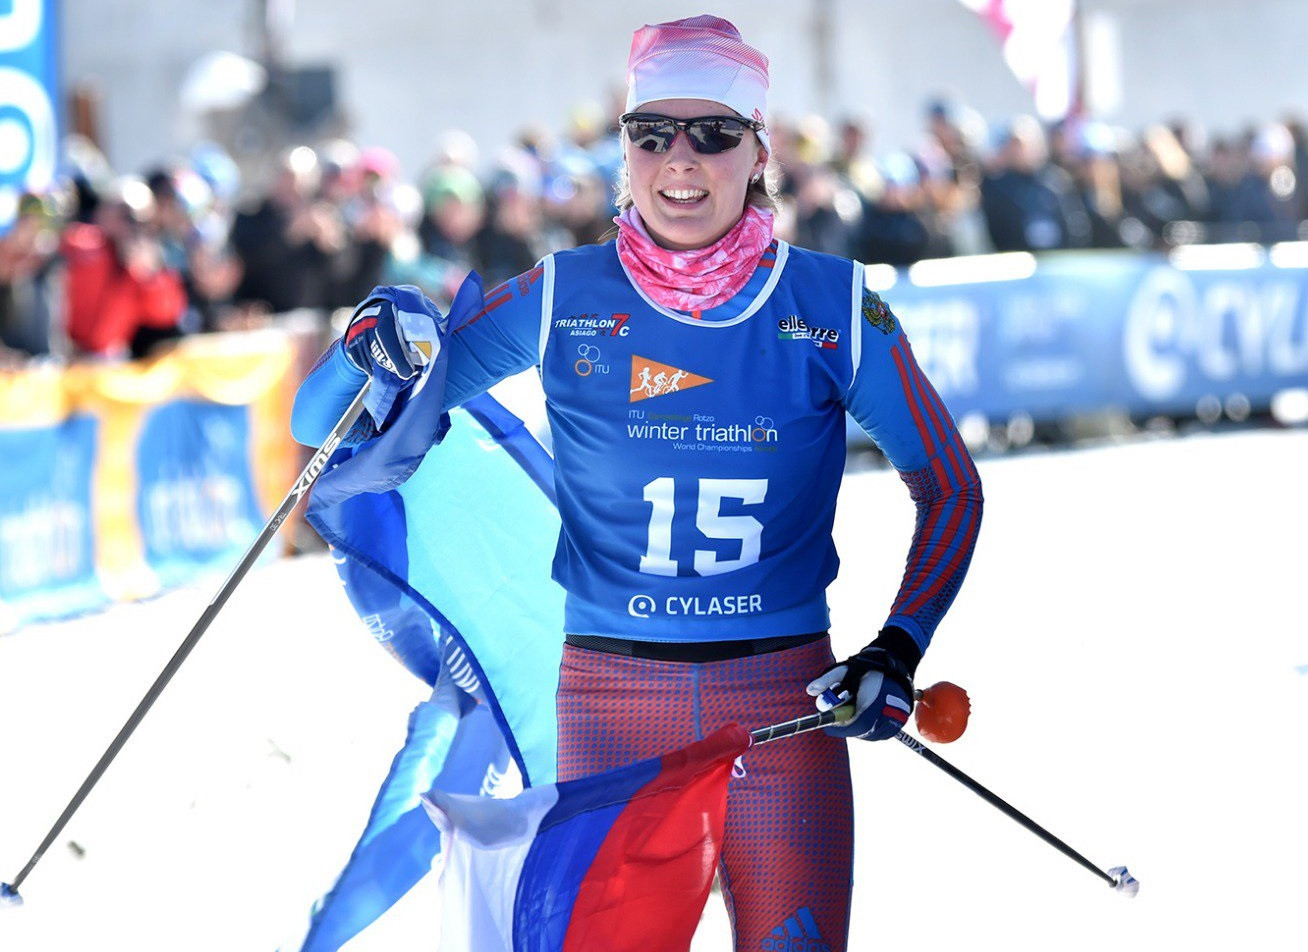 Daria Rogozina of Russia is aiming to defend her women's title at the Winter Triathlon World Championships in the Italian town of Asiago ©World Triathlon